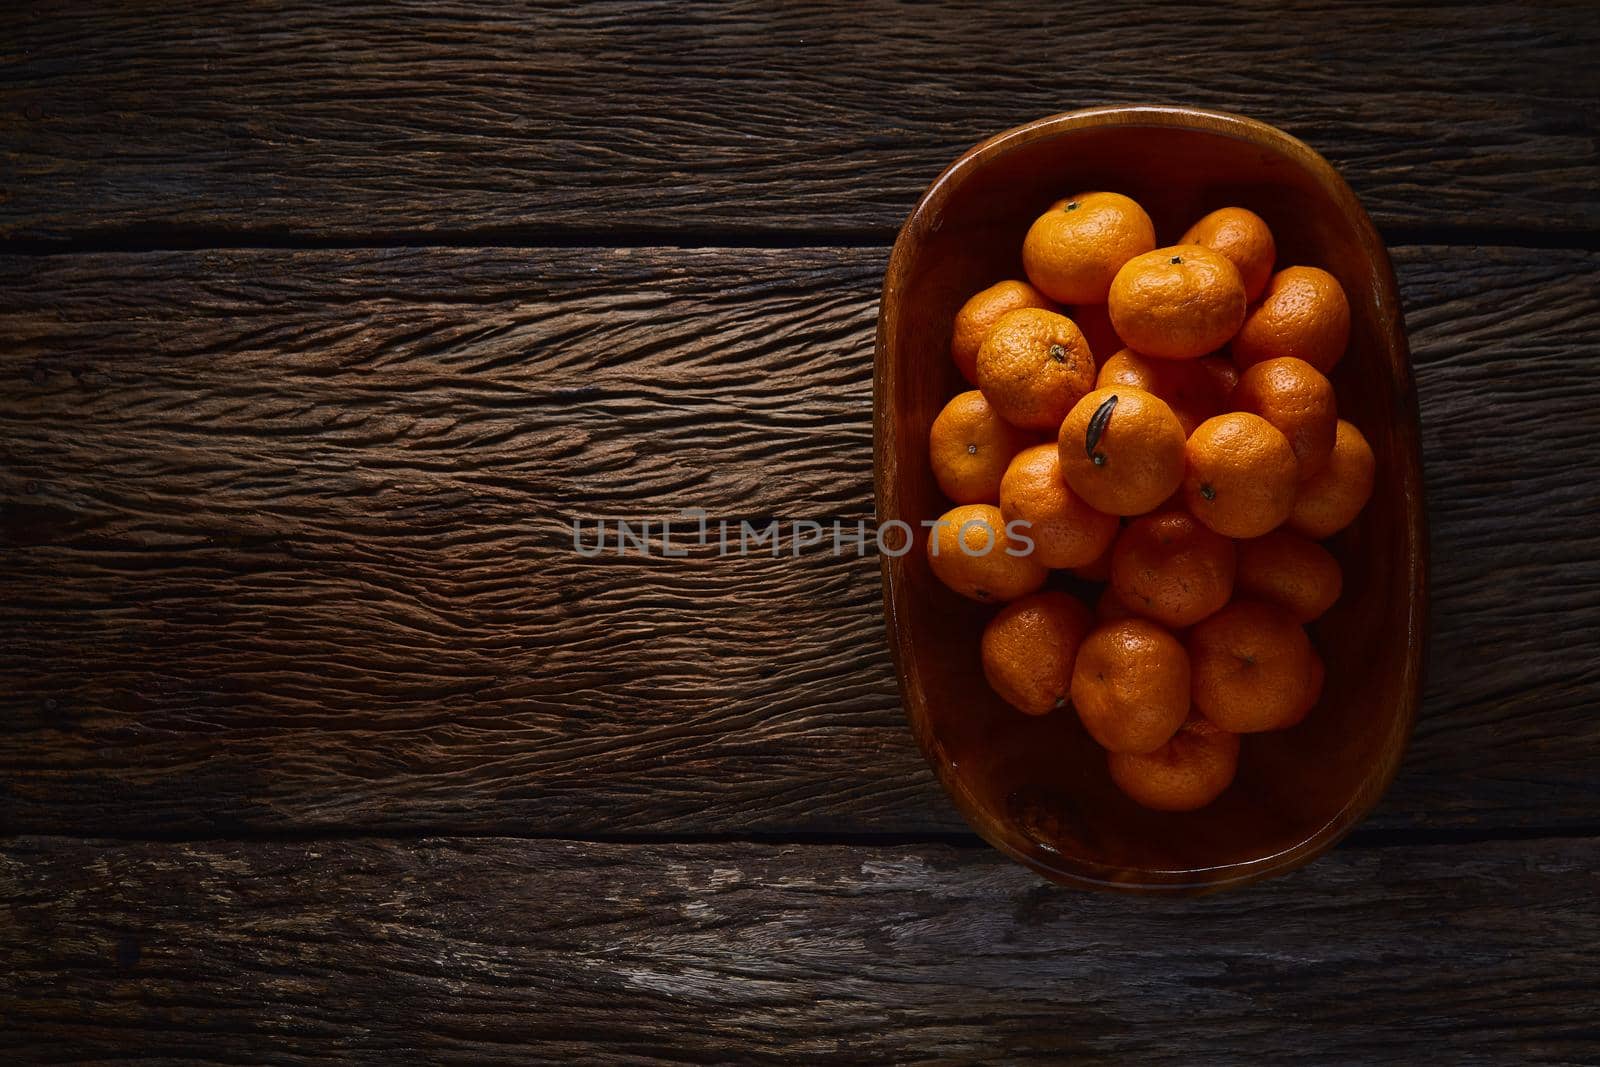 Still life with orange  by Wasant